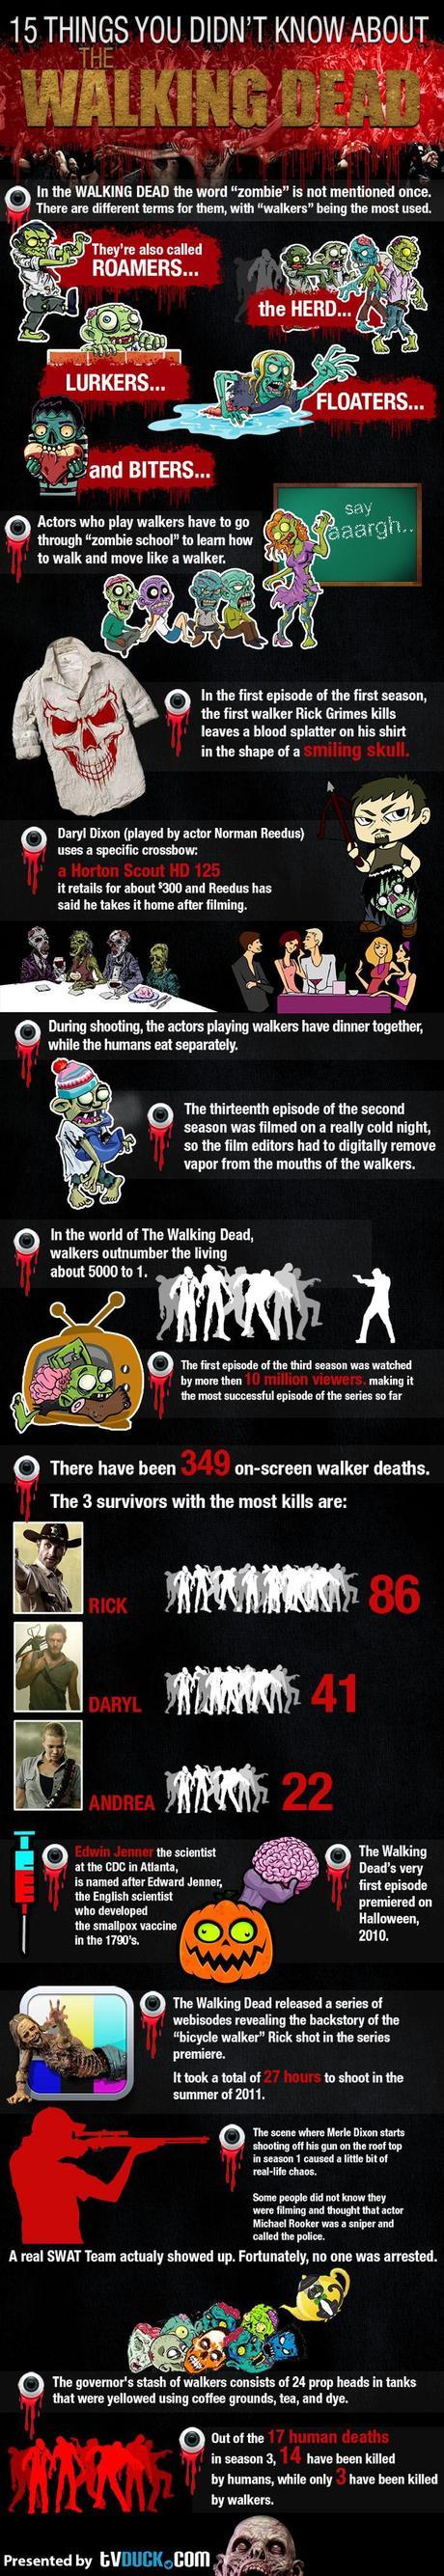 15 Things You Did Not Know About The Walking Dead Infographic